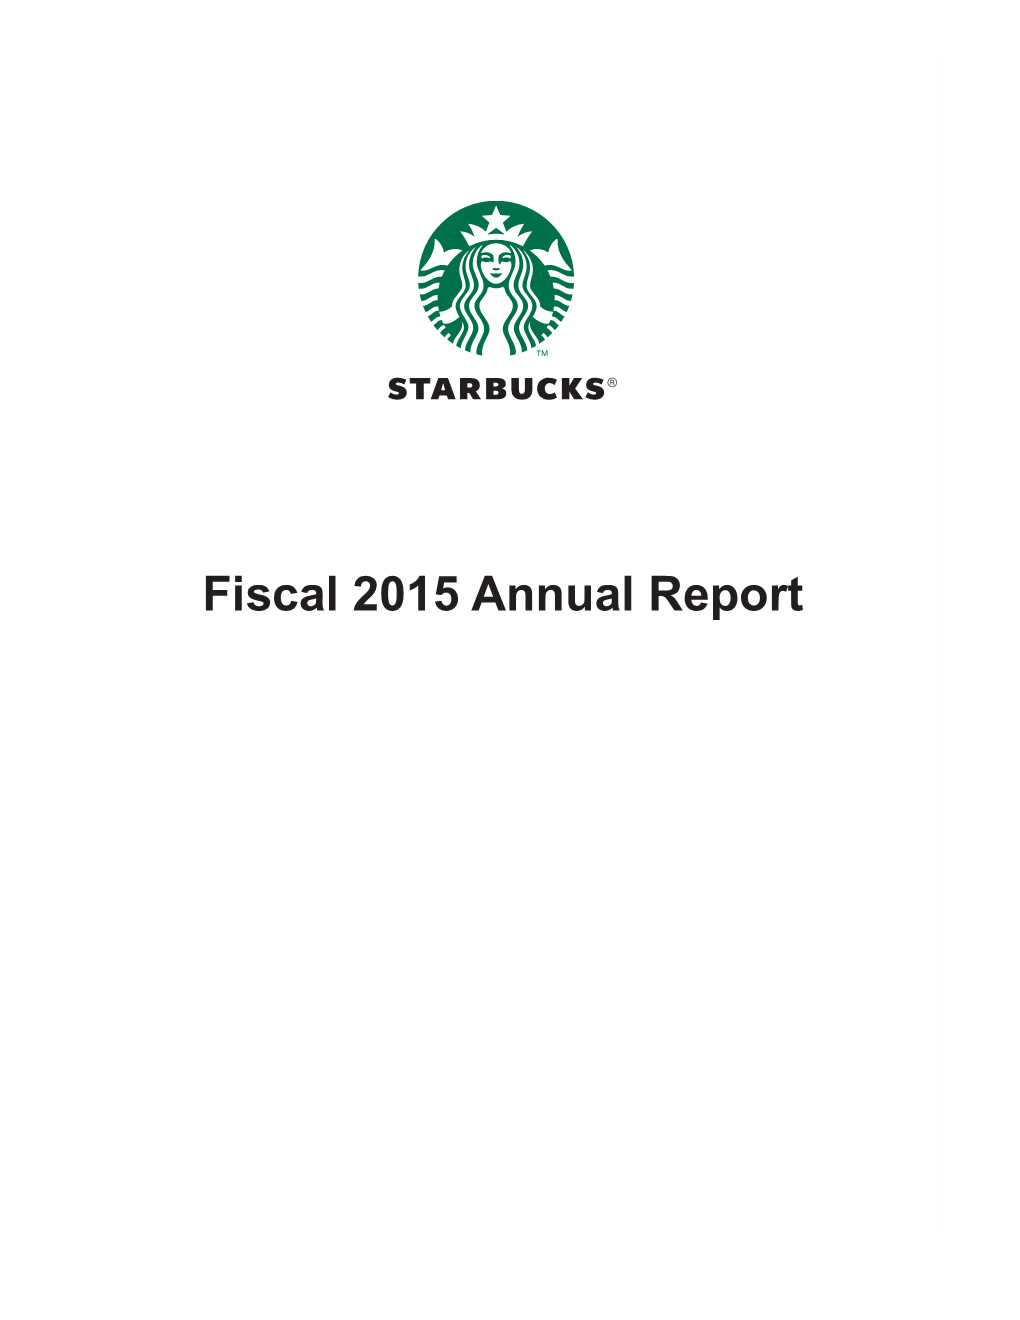 Fiscal 2015 Annual Report